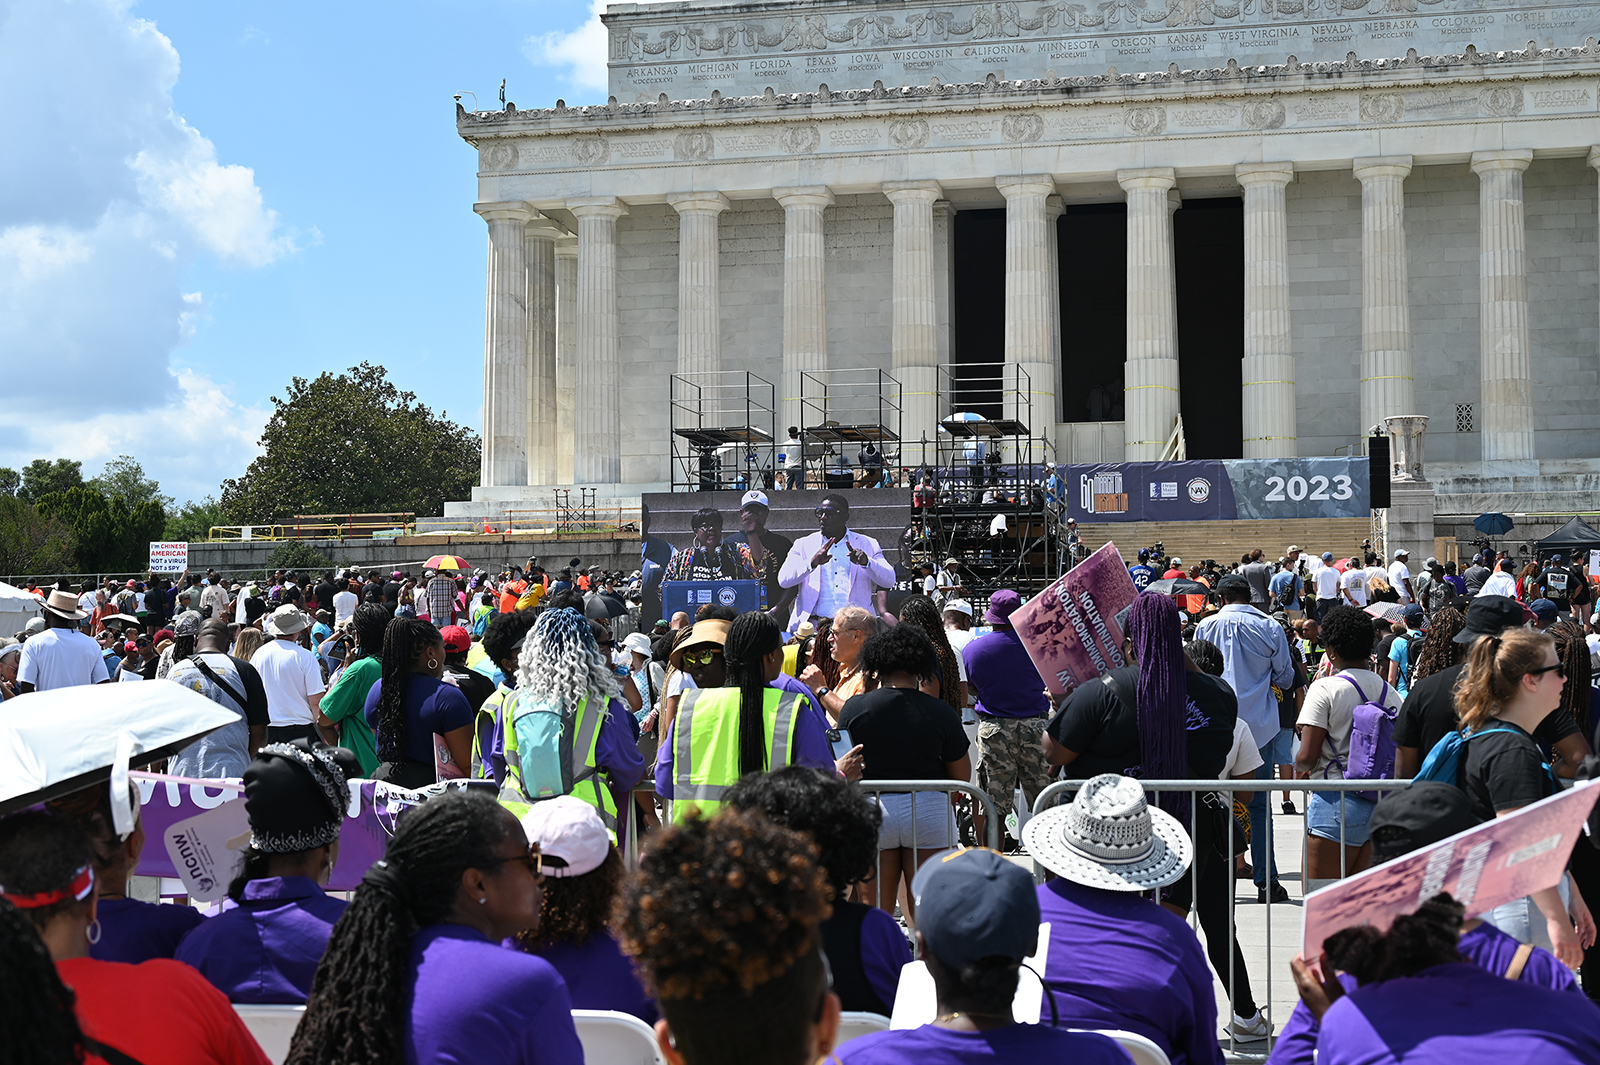 Attendees listen to speakers during the 60th anniversary of the March on Washington at the Lincoln Memorial in Washington, D.C., on Aug. 26, 2023. RNS photo by Jack Jenkins.